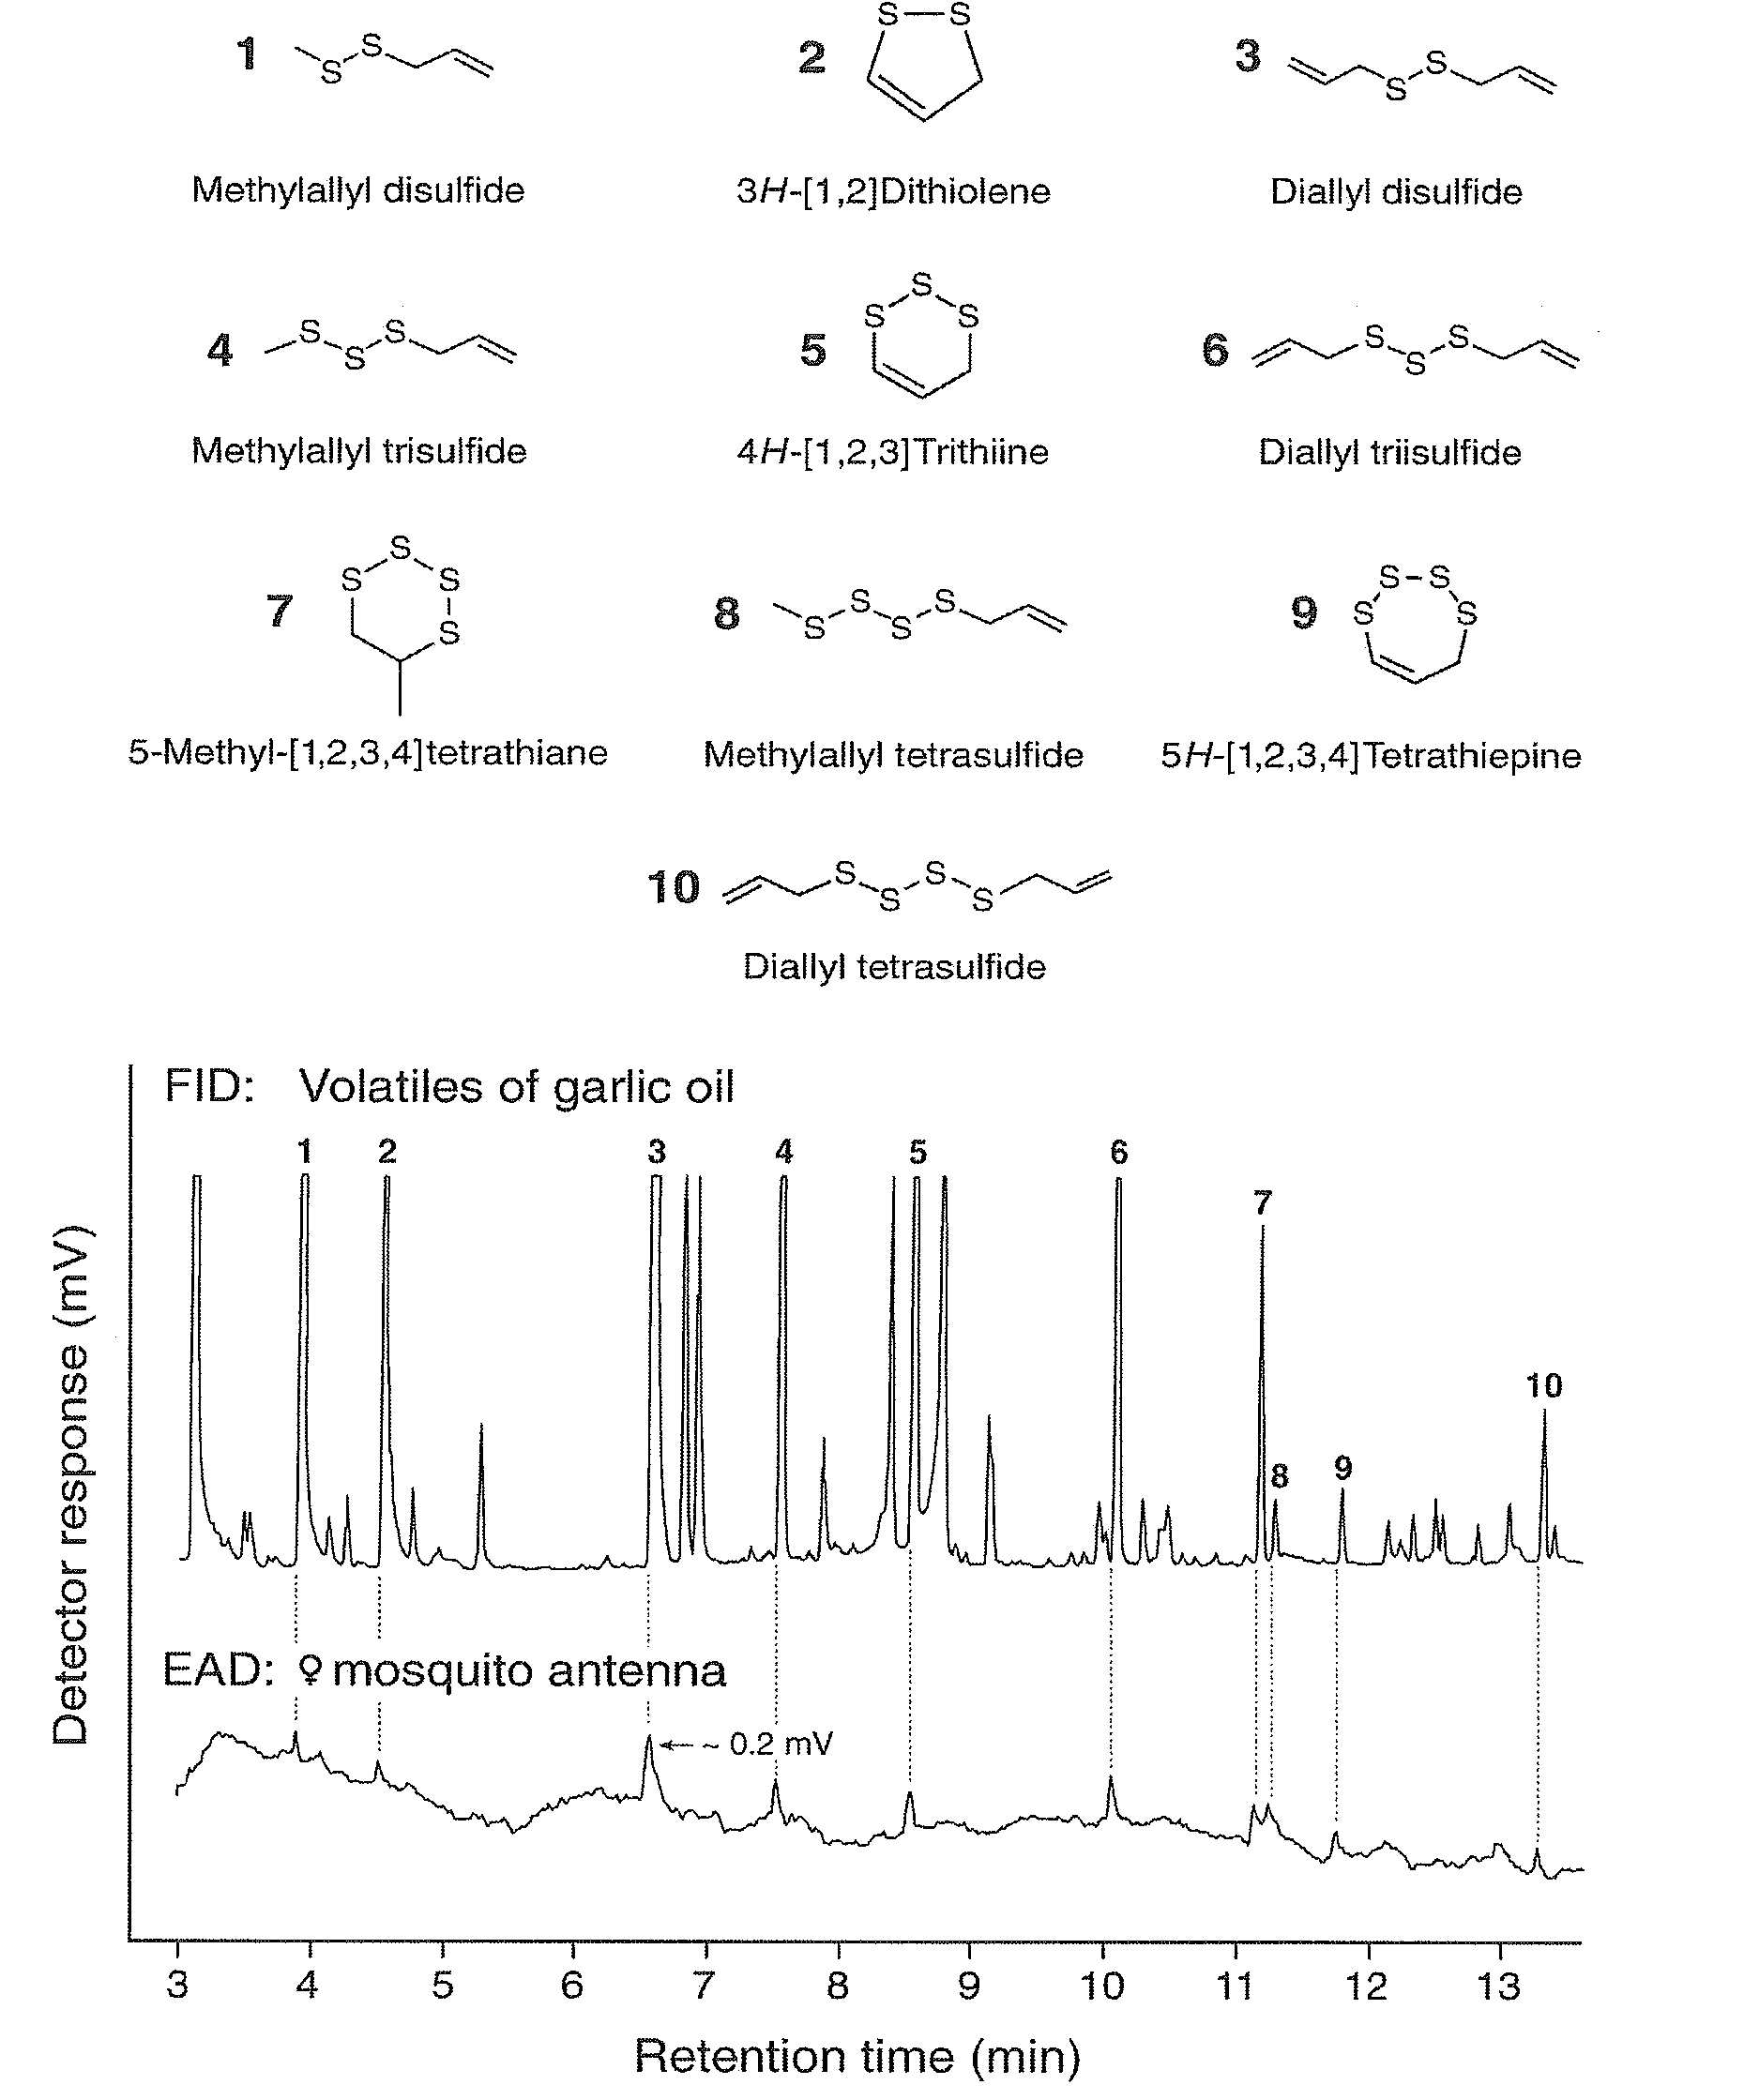 Compounds, compositions and methods for repelling blood-feeding arthropods and deterring their landing and feeding